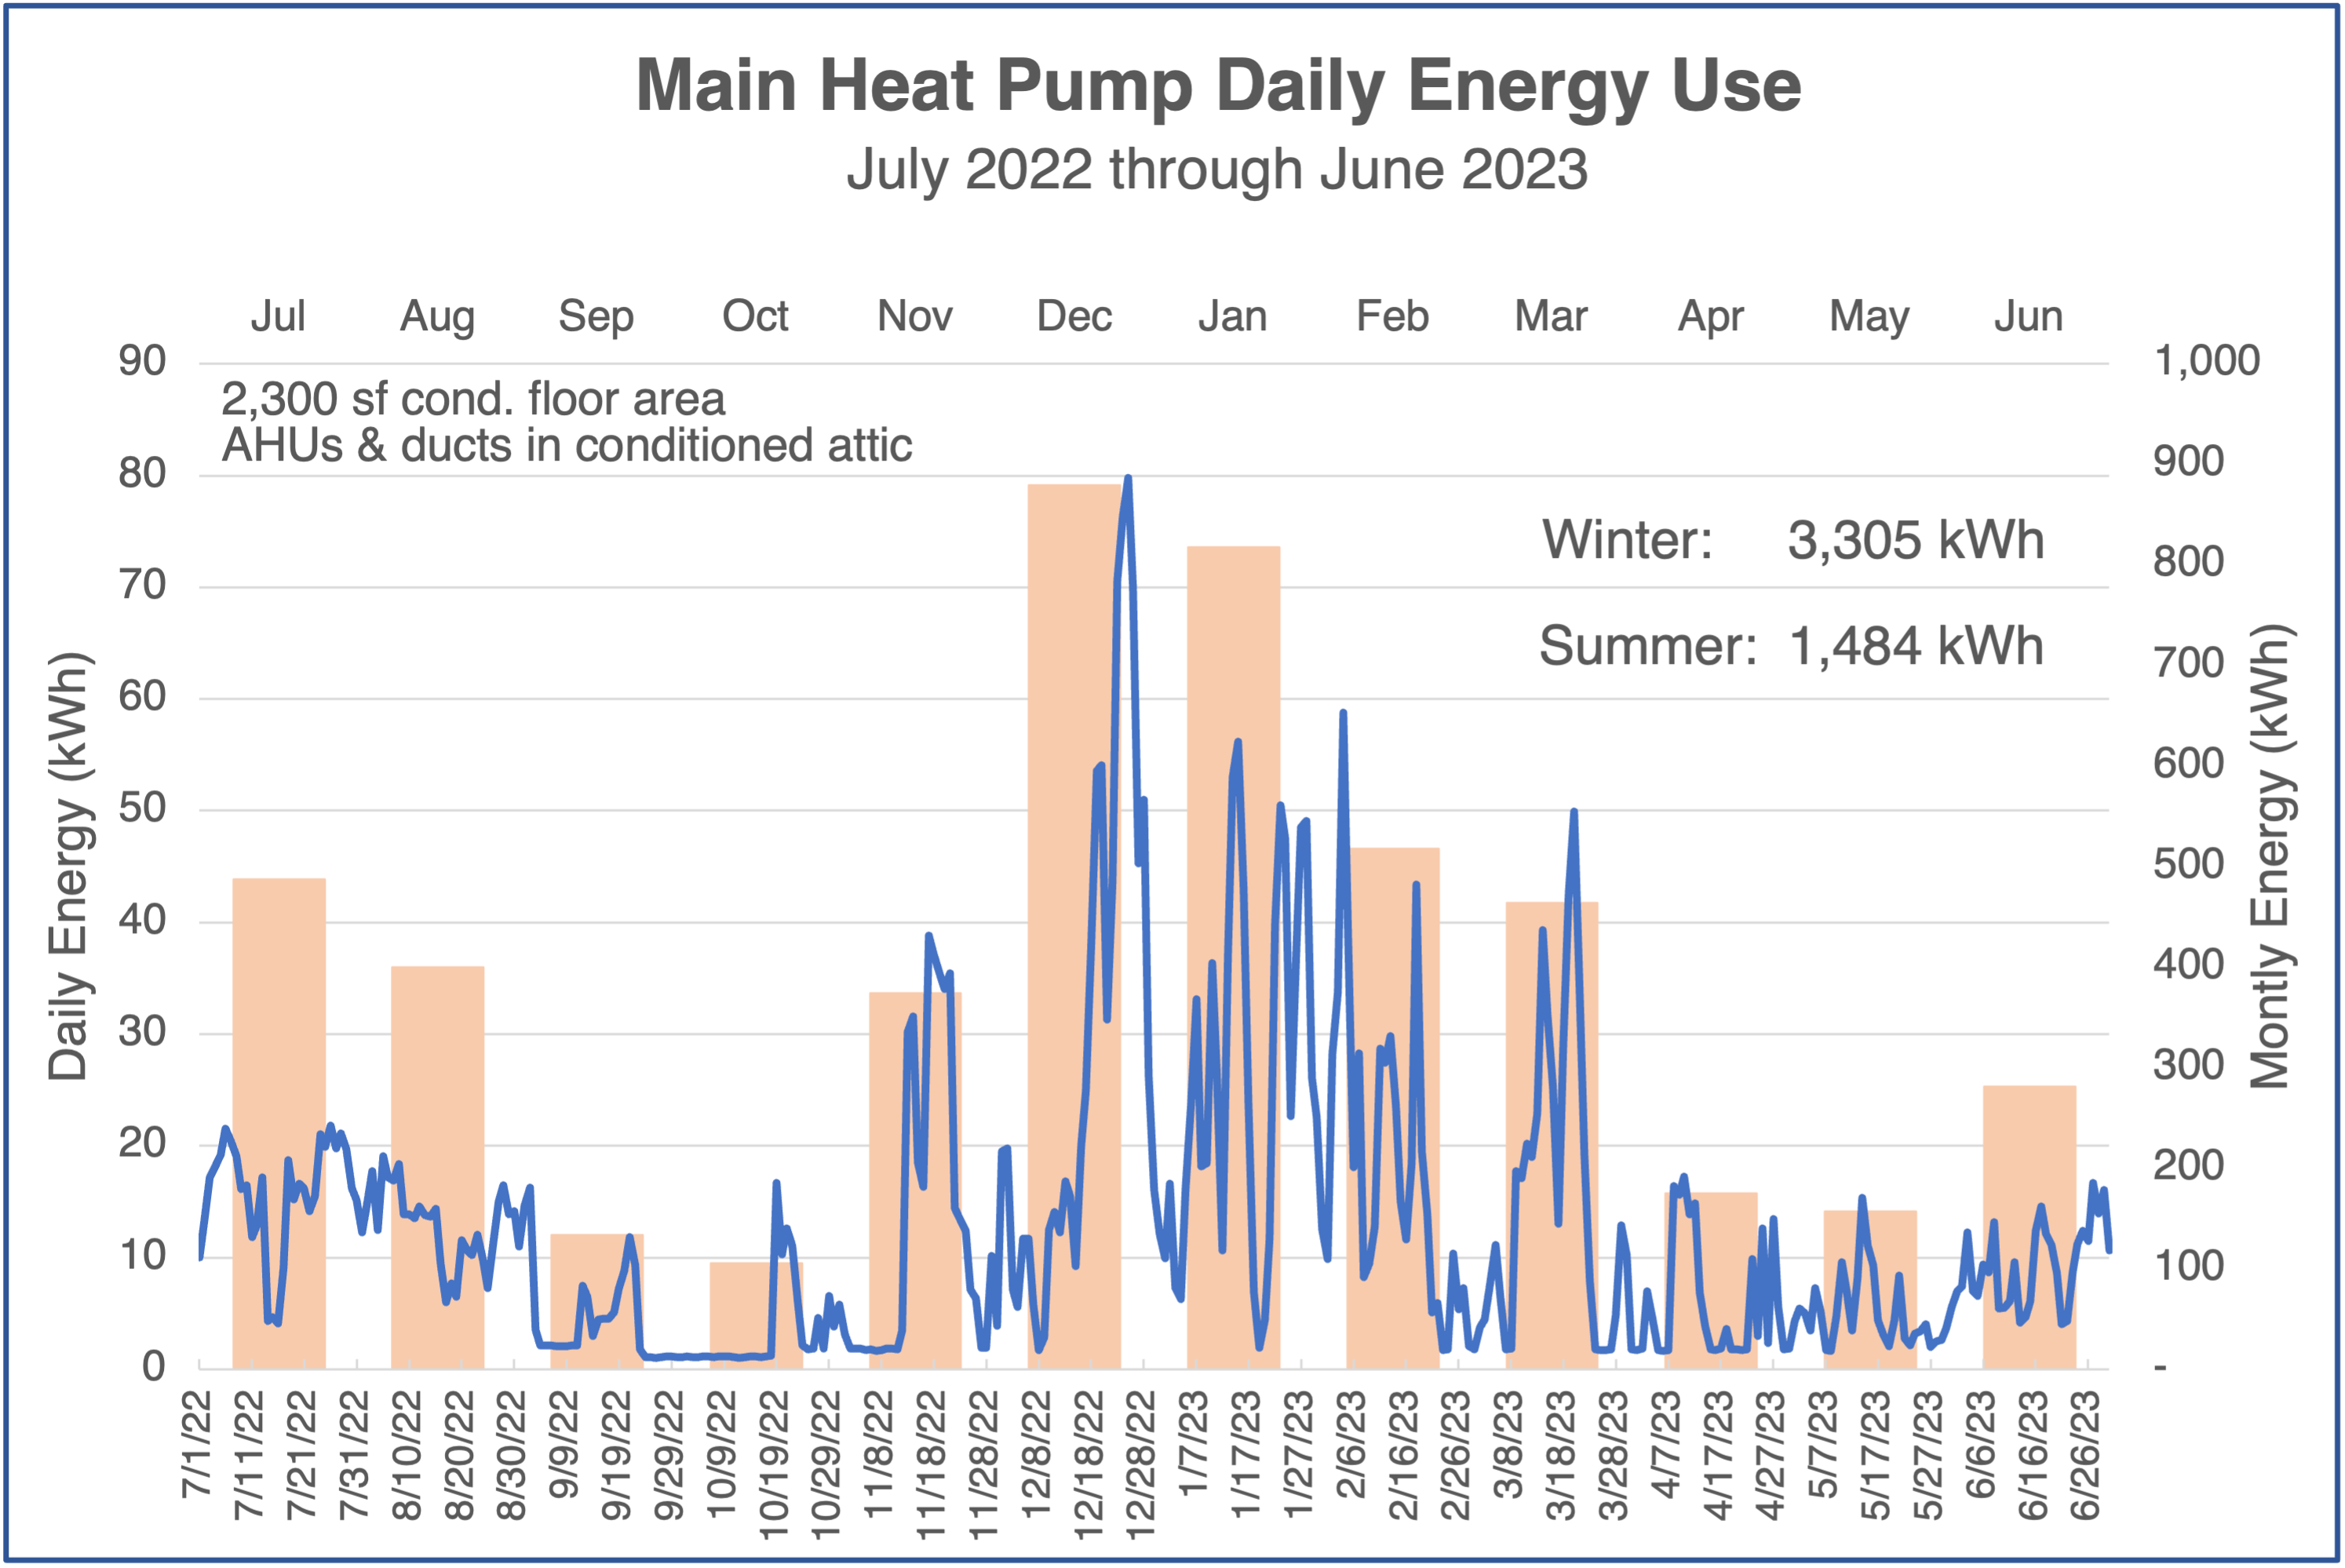 Main heat pump energy use, daily and monthly